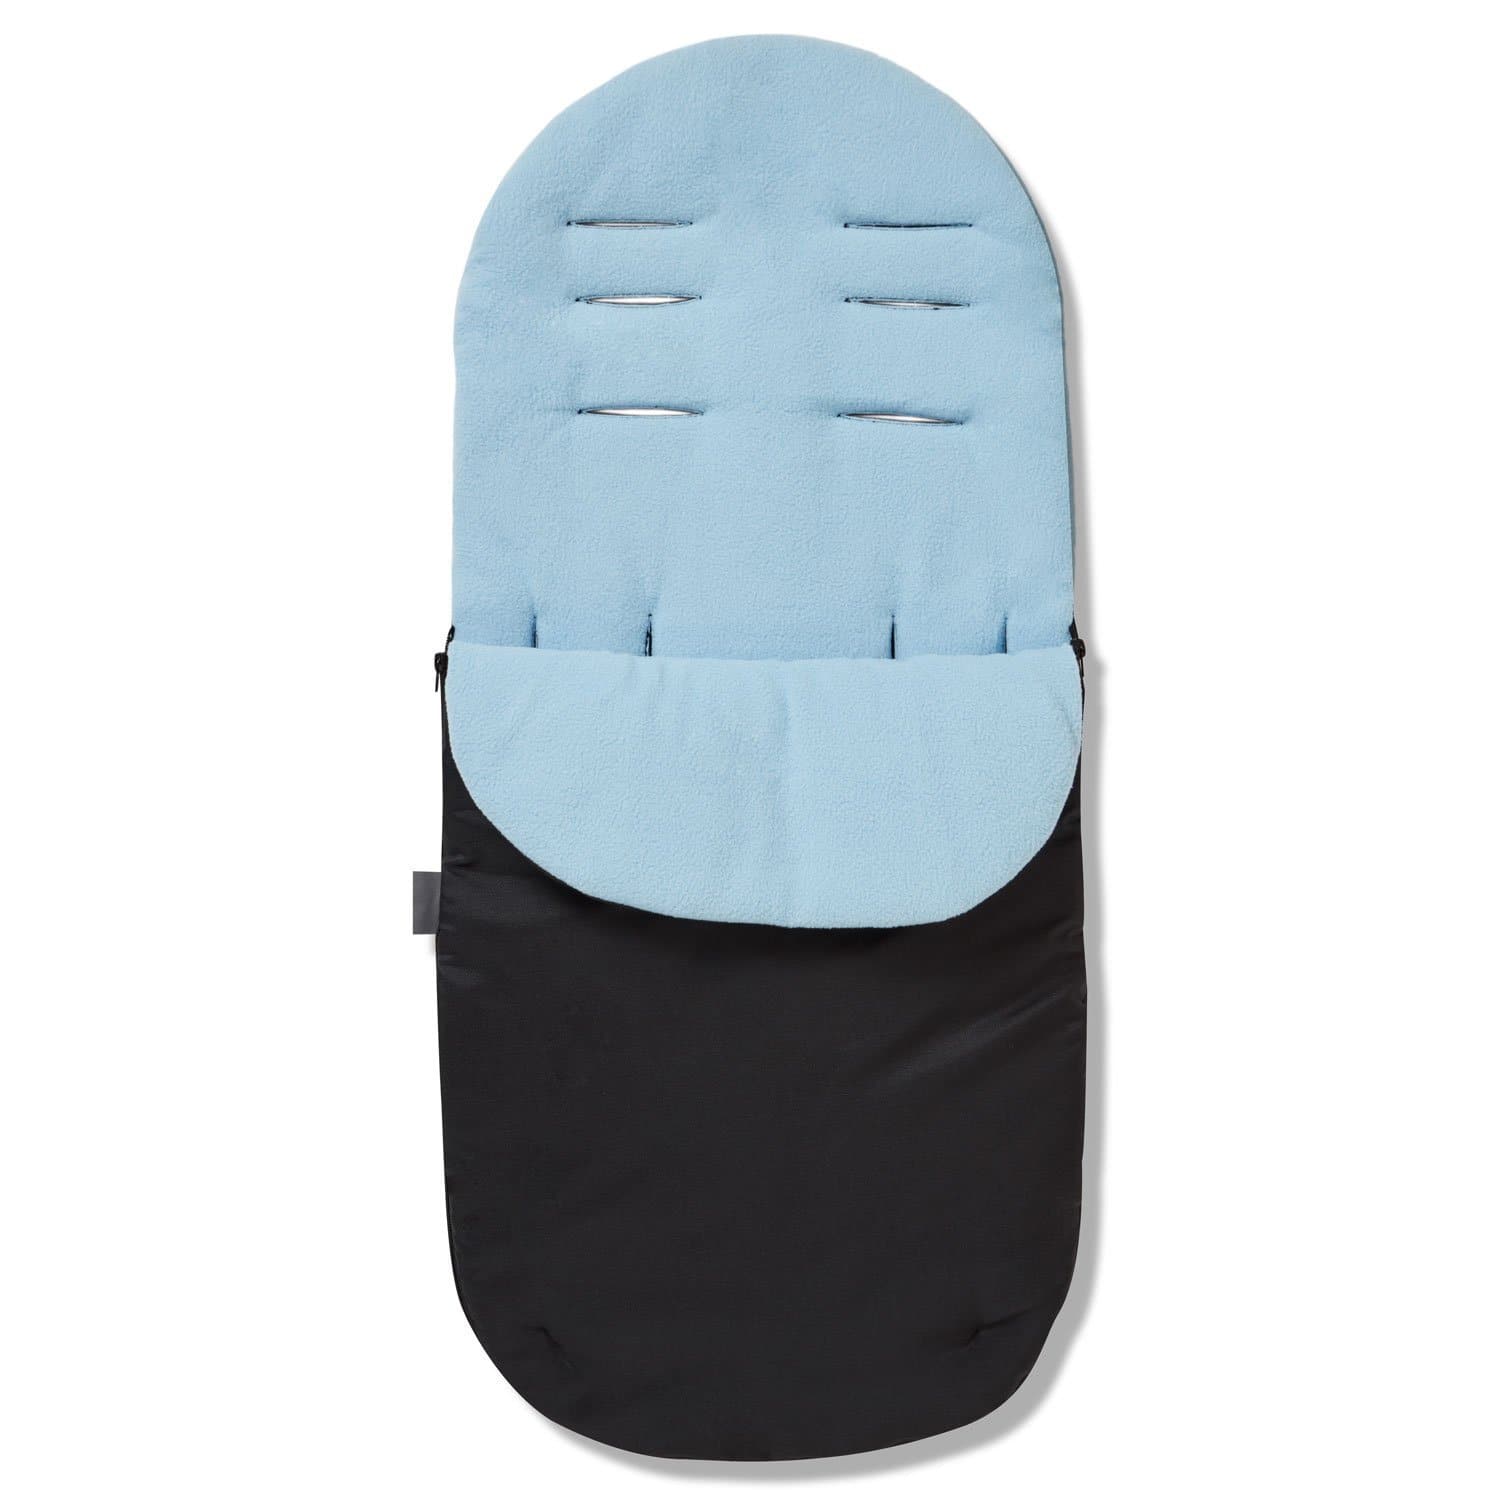 Footmuff / Cosy Toes Compatible with Cosatto - Light Blue / Fits All Models | For Your Little One